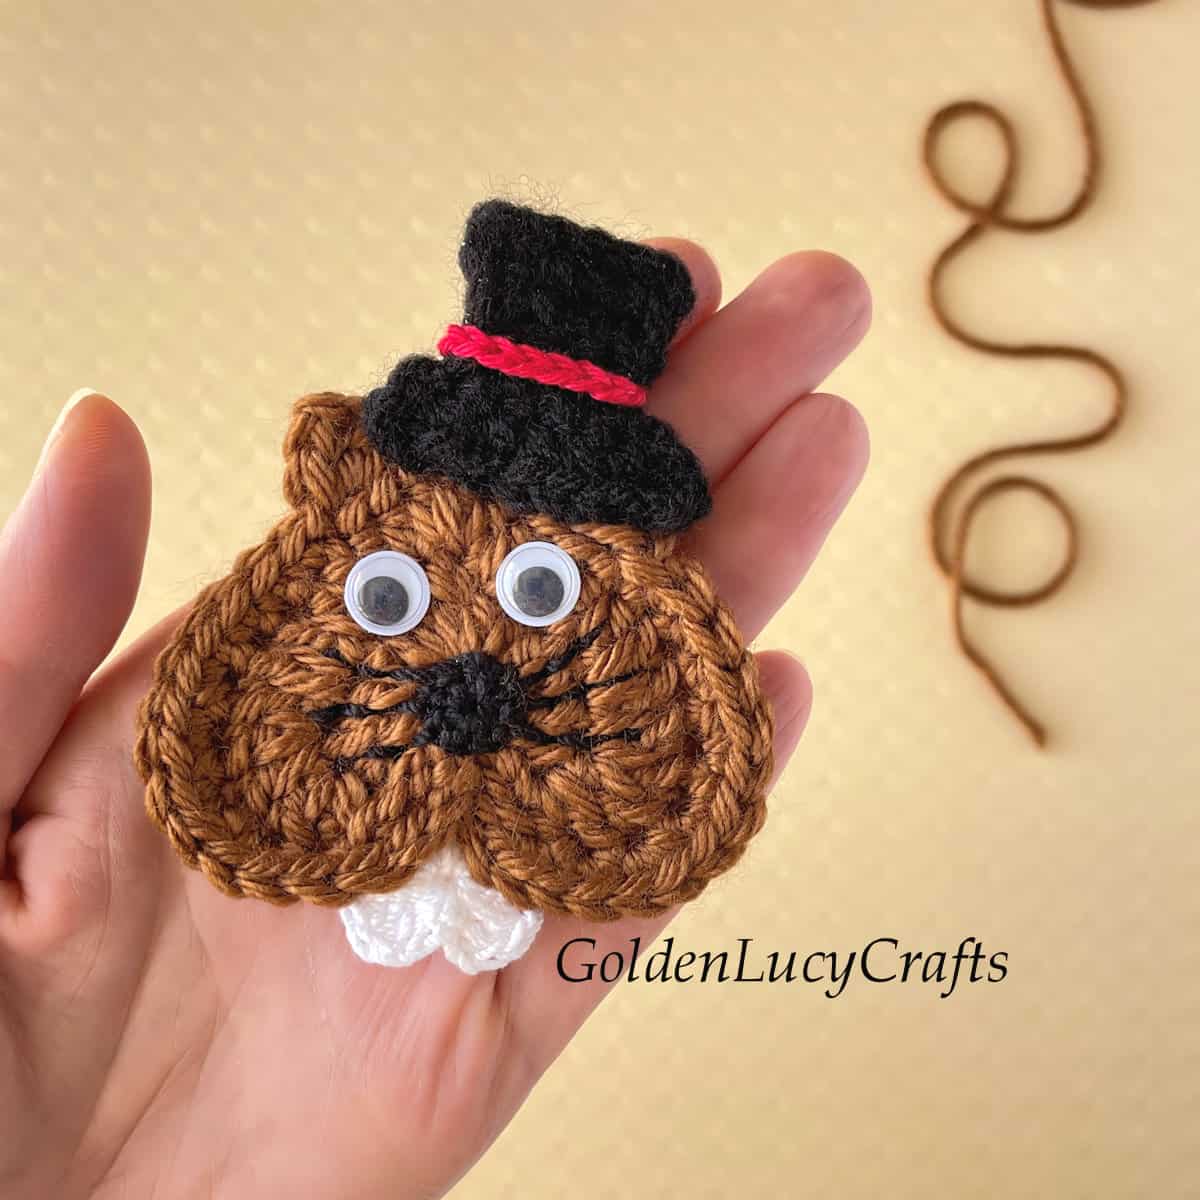 Crochet groundhog applique in the palm of a hand.